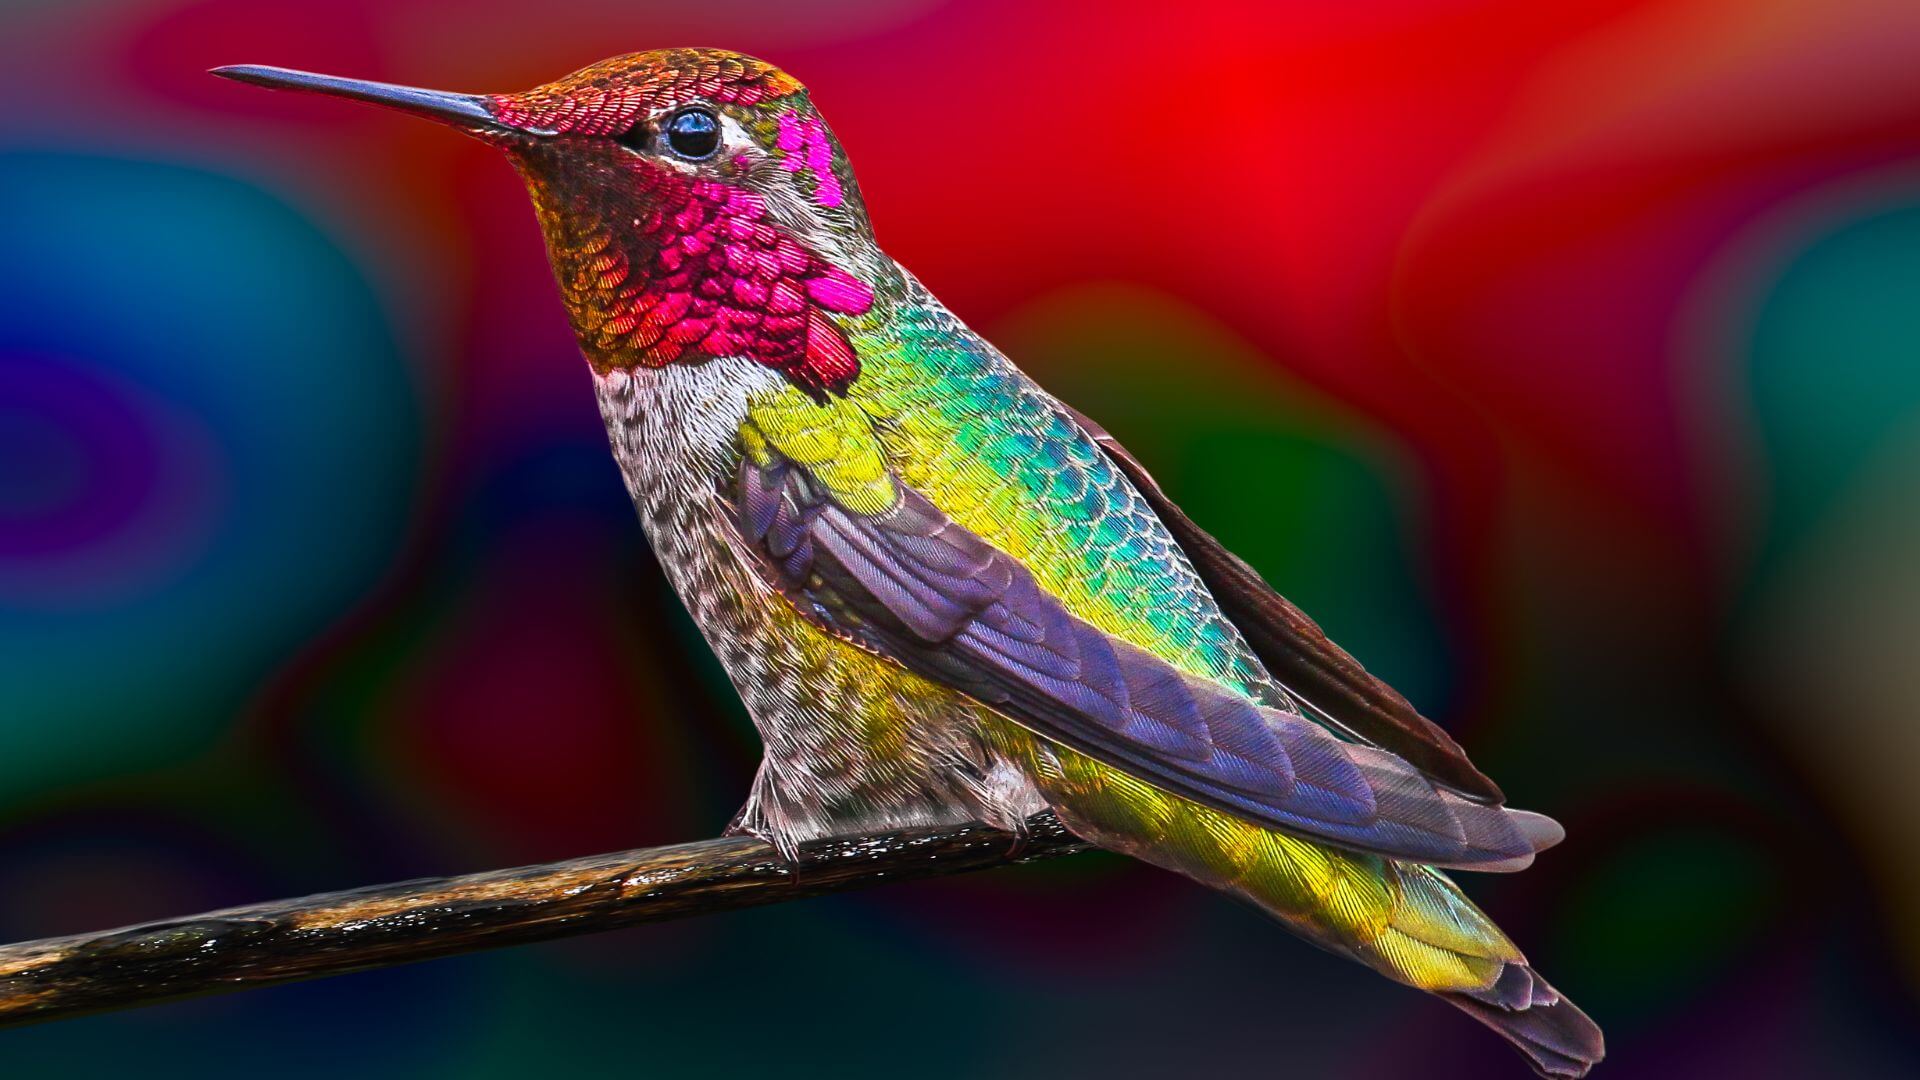 Are Hummingbirds Color Blind?